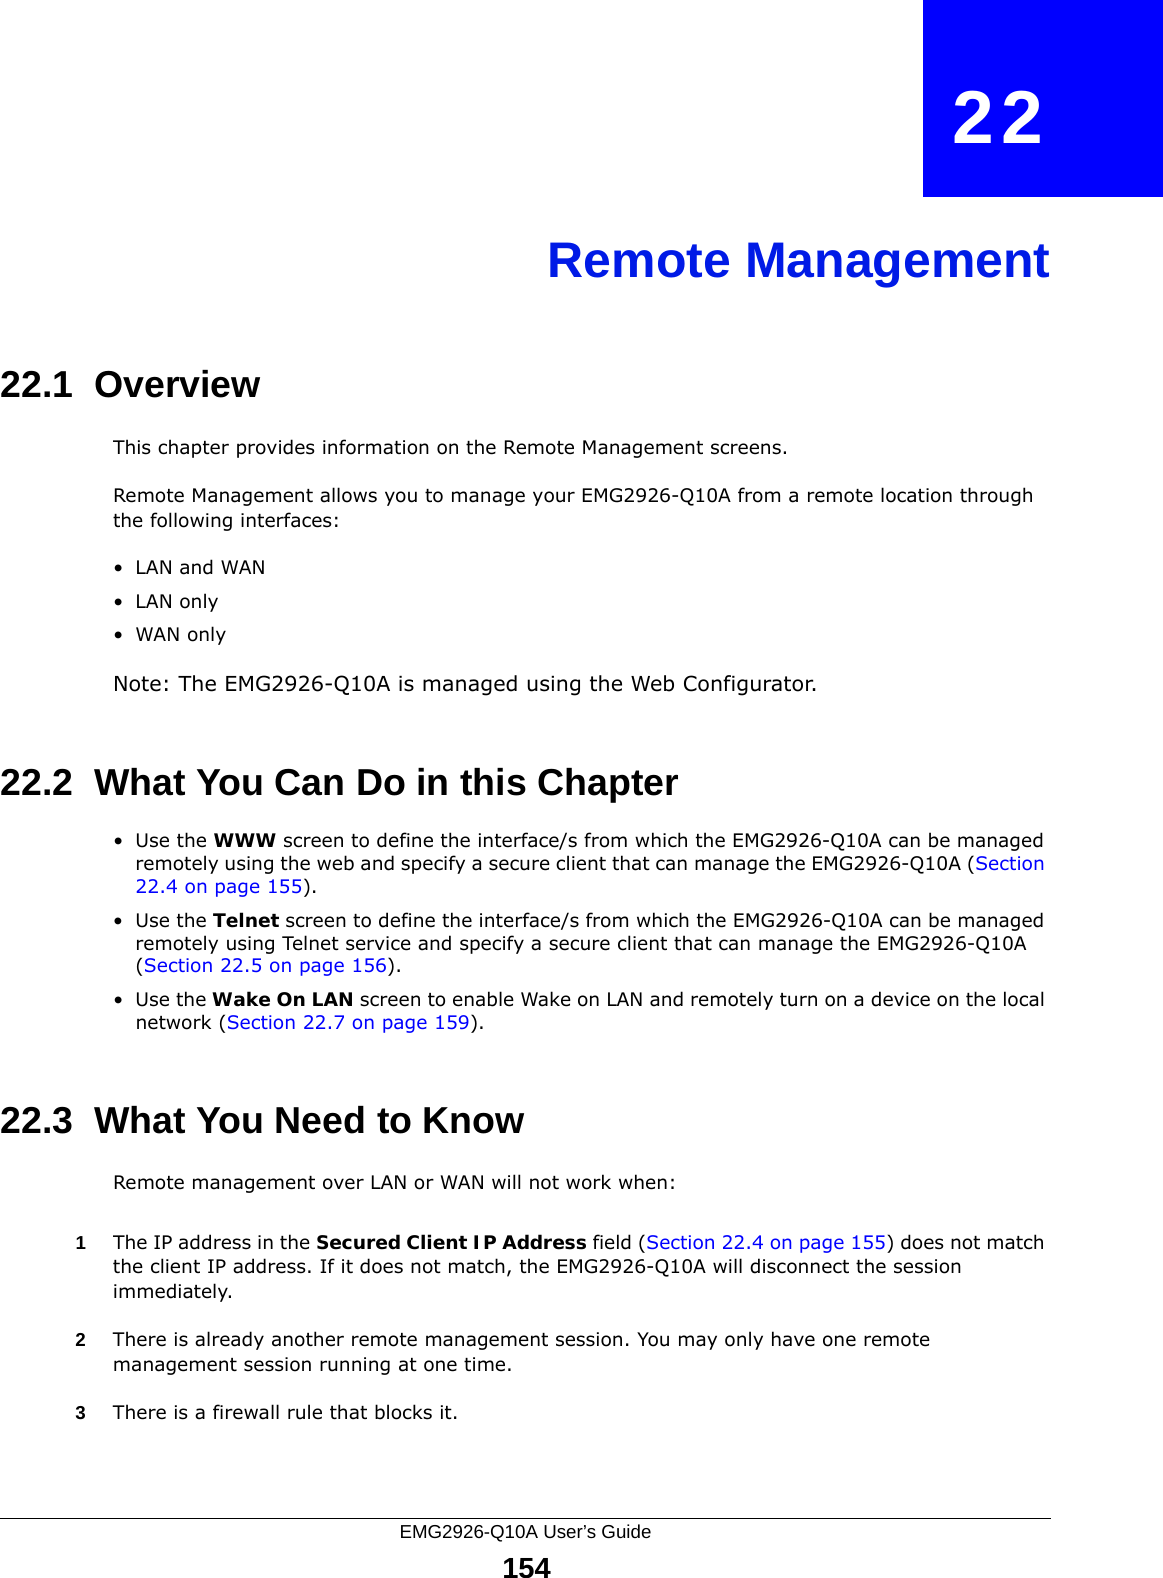 EMG2926-Q10A User’s Guide154CHAPTER   22Remote Management22.1  OverviewThis chapter provides information on the Remote Management screens. Remote Management allows you to manage your EMG2926-Q10A from a remote location through the following interfaces:•LAN and WAN•LAN only•WAN onlyNote: The EMG2926-Q10A is managed using the Web Configurator.22.2  What You Can Do in this Chapter•Use the WWW screen to define the interface/s from which the EMG2926-Q10A can be managed remotely using the web and specify a secure client that can manage the EMG2926-Q10A (Section 22.4 on page 155).•Use the Telnet screen to define the interface/s from which the EMG2926-Q10A can be managed remotely using Telnet service and specify a secure client that can manage the EMG2926-Q10A (Section 22.5 on page 156).•Use the Wake On LAN screen to enable Wake on LAN and remotely turn on a device on the local network (Section 22.7 on page 159).22.3  What You Need to KnowRemote management over LAN or WAN will not work when:1The IP address in the Secured Client IP Address field (Section 22.4 on page 155) does not match the client IP address. If it does not match, the EMG2926-Q10A will disconnect the session immediately.2There is already another remote management session. You may only have one remote management session running at one time.3There is a firewall rule that blocks it.